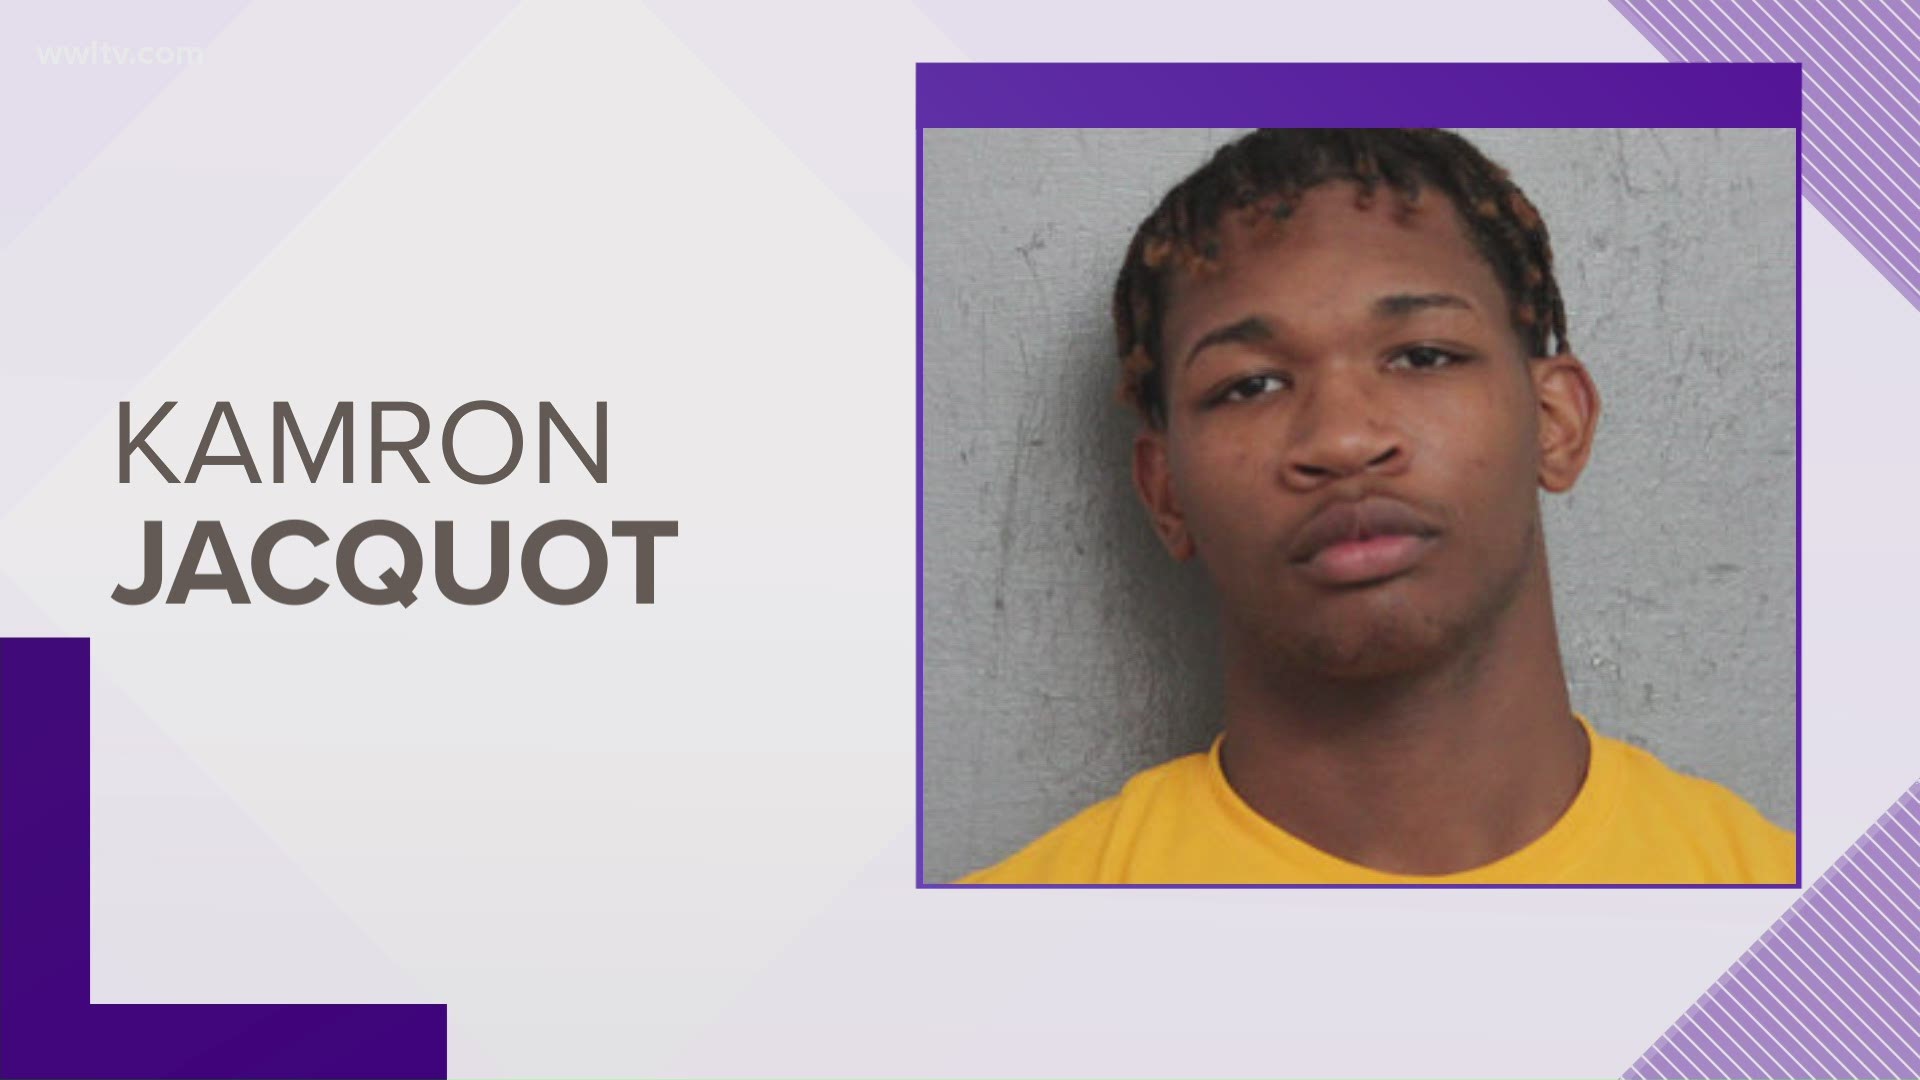 Police have arrested 20-year-old Kamron Kajon Jacquot for the January 1st double shooting that lead to the death of one person.